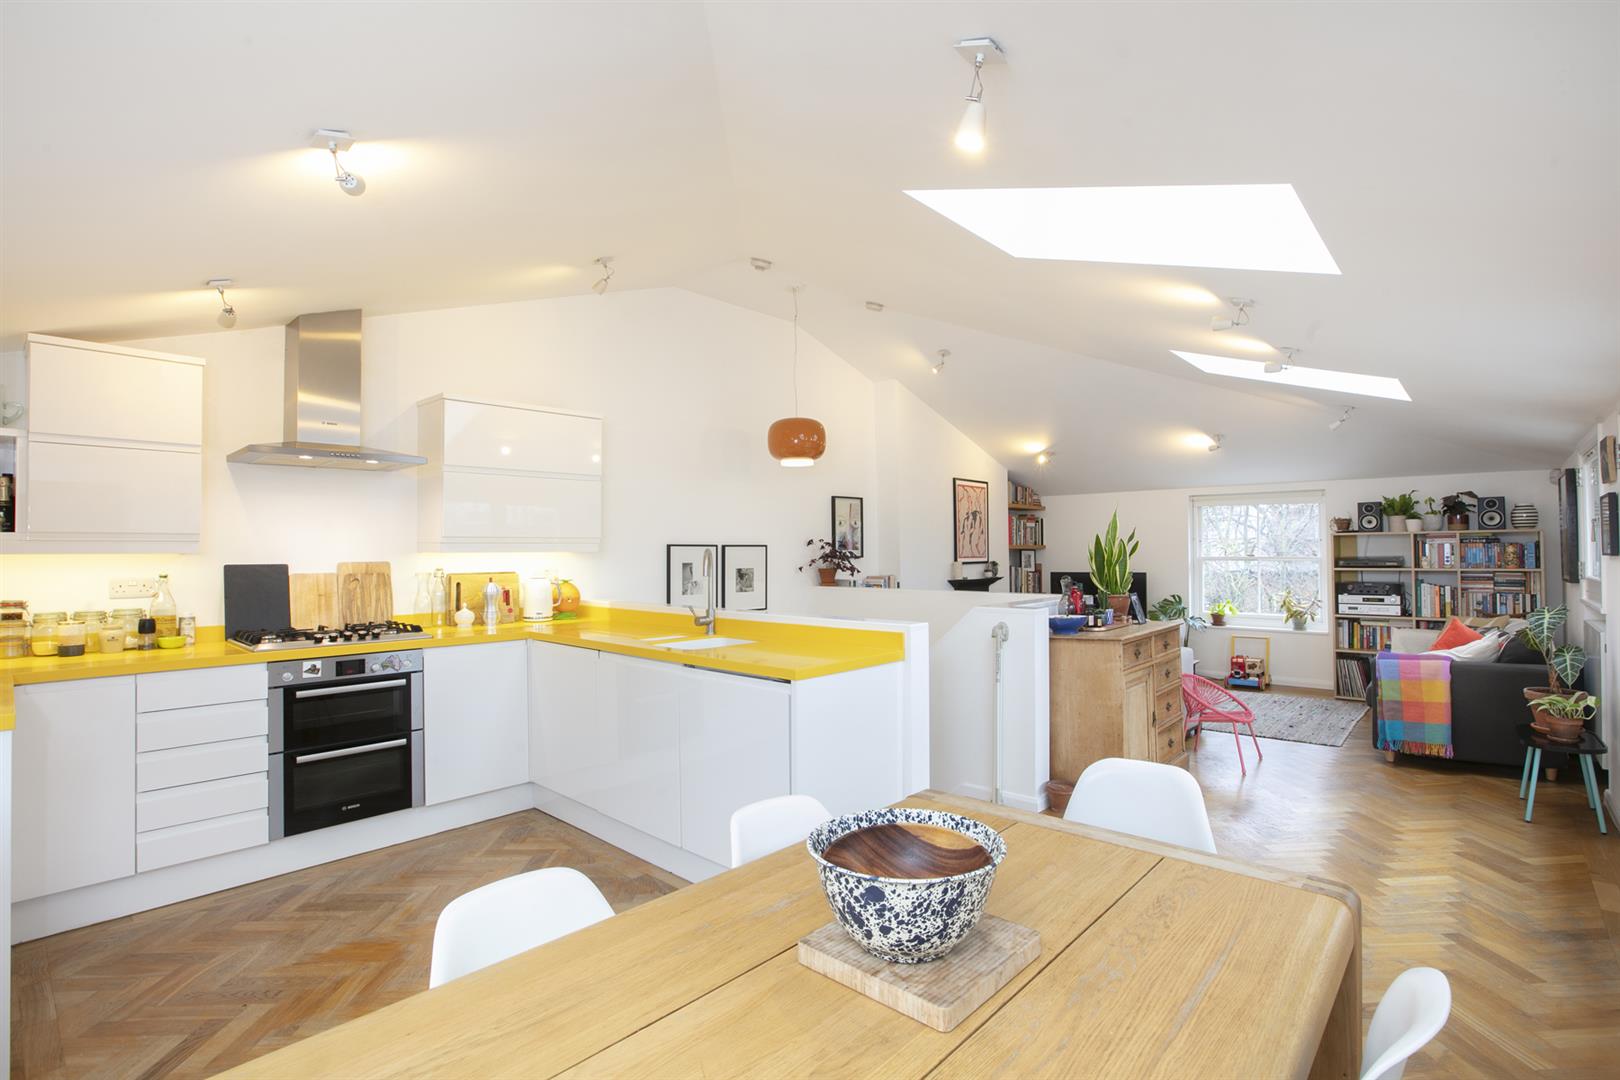 Flat - Conversion For Sale in Holly Grove, Peckham, SE15 893 view1